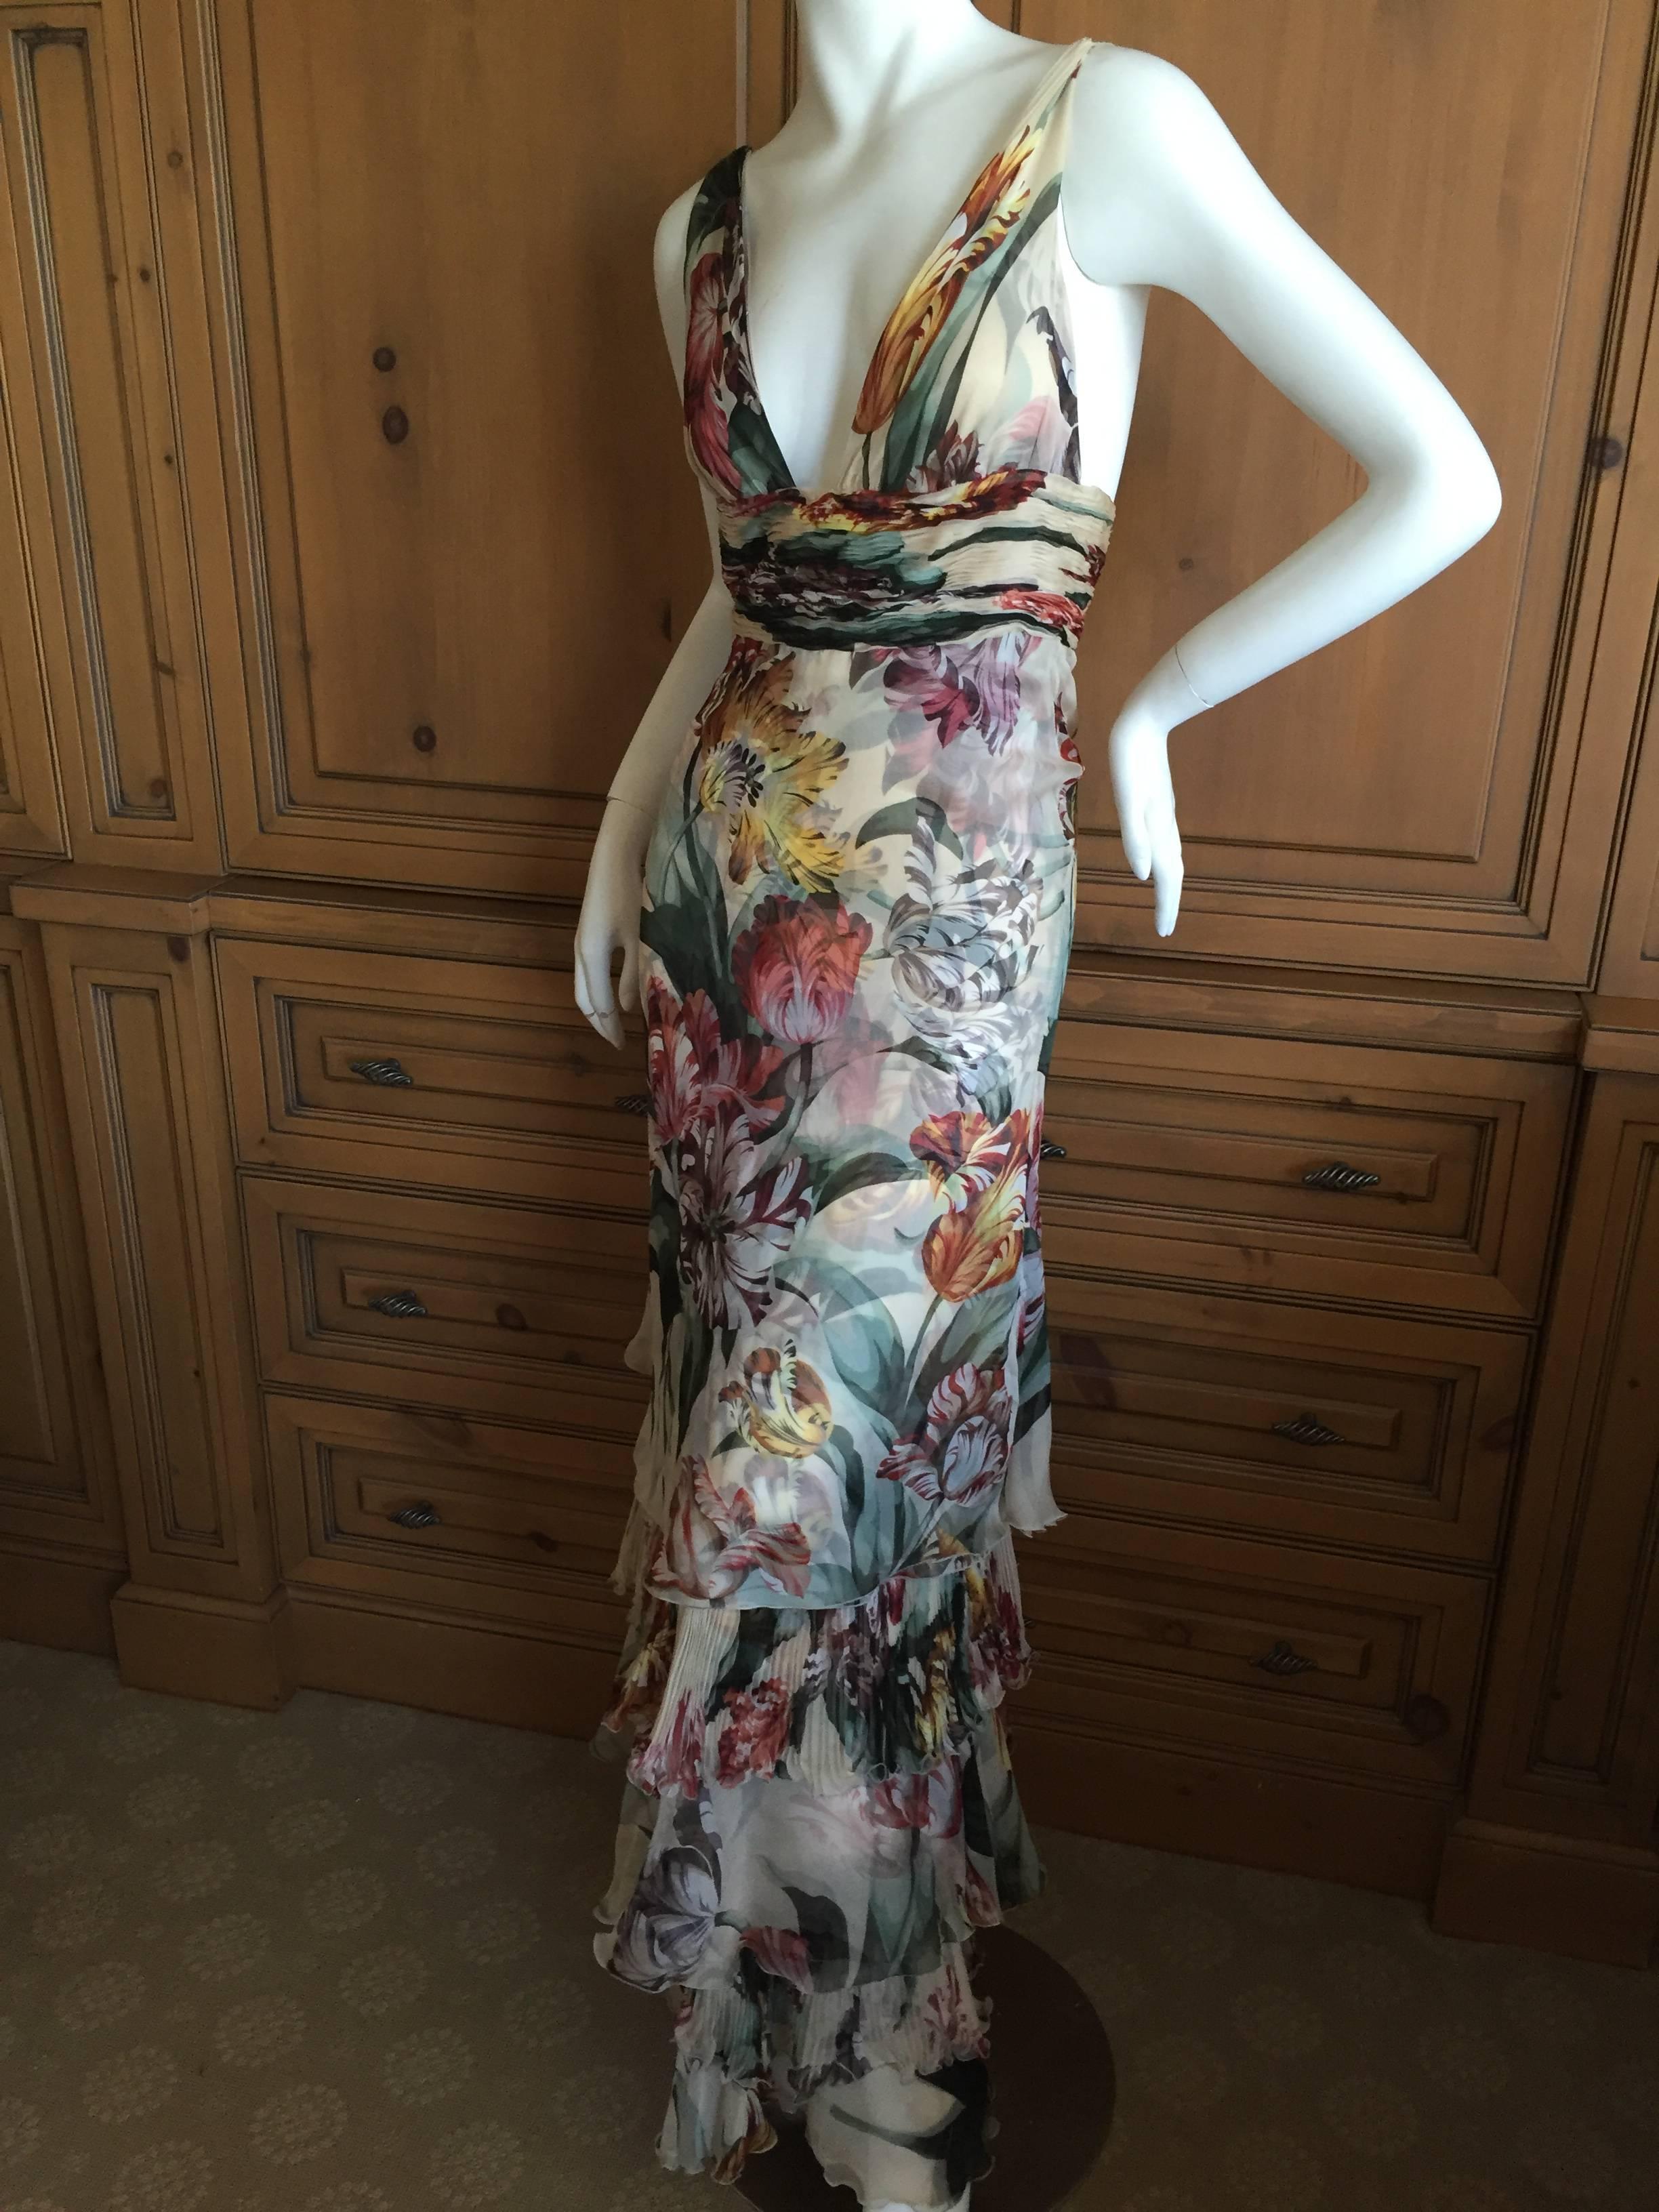 Elegant tulip pattern silk chiffon dress from pre retirement Valentino.
Beautiful tulip print silk confection from Valentino.
Ruched top with revealinhg back the skirt is tiered with alternating knife pleated layers .
Size 4
Bust 34